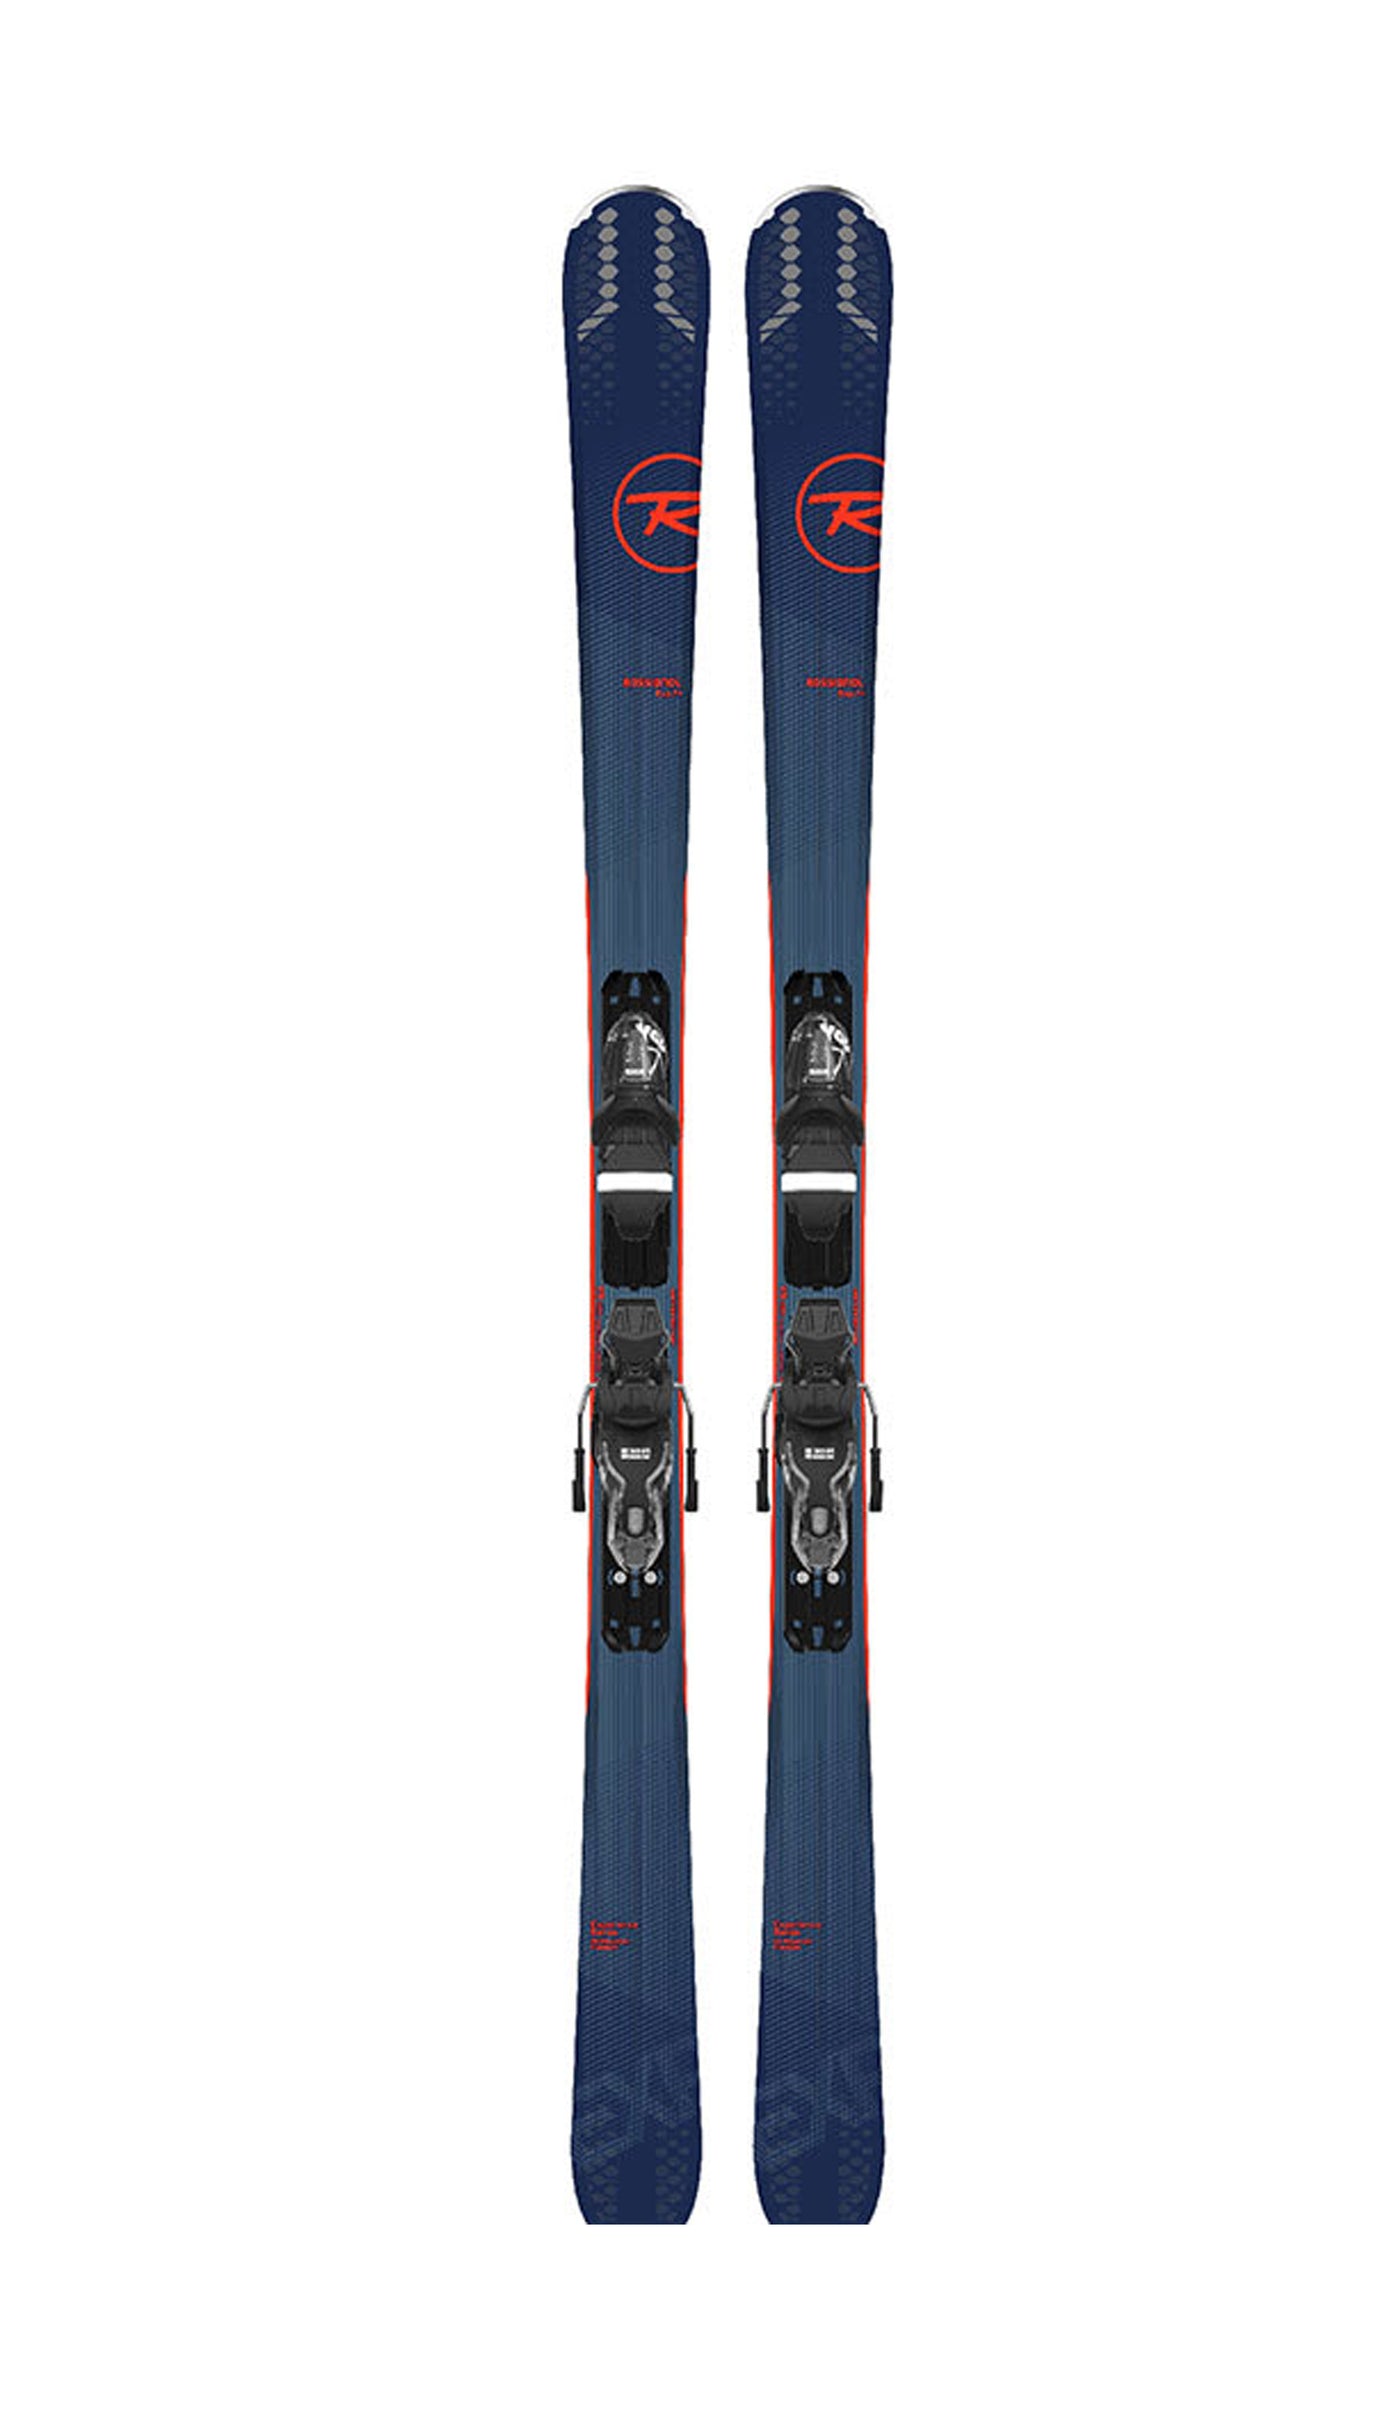 SKIS ROSSIGNOL MEN'S ALL MOUNTAIN SKIS EXPERIENCE 74 -XPRESS 2 BINDINGS - Alleydesigns  Pty Ltd                                             ABN: 44165571264